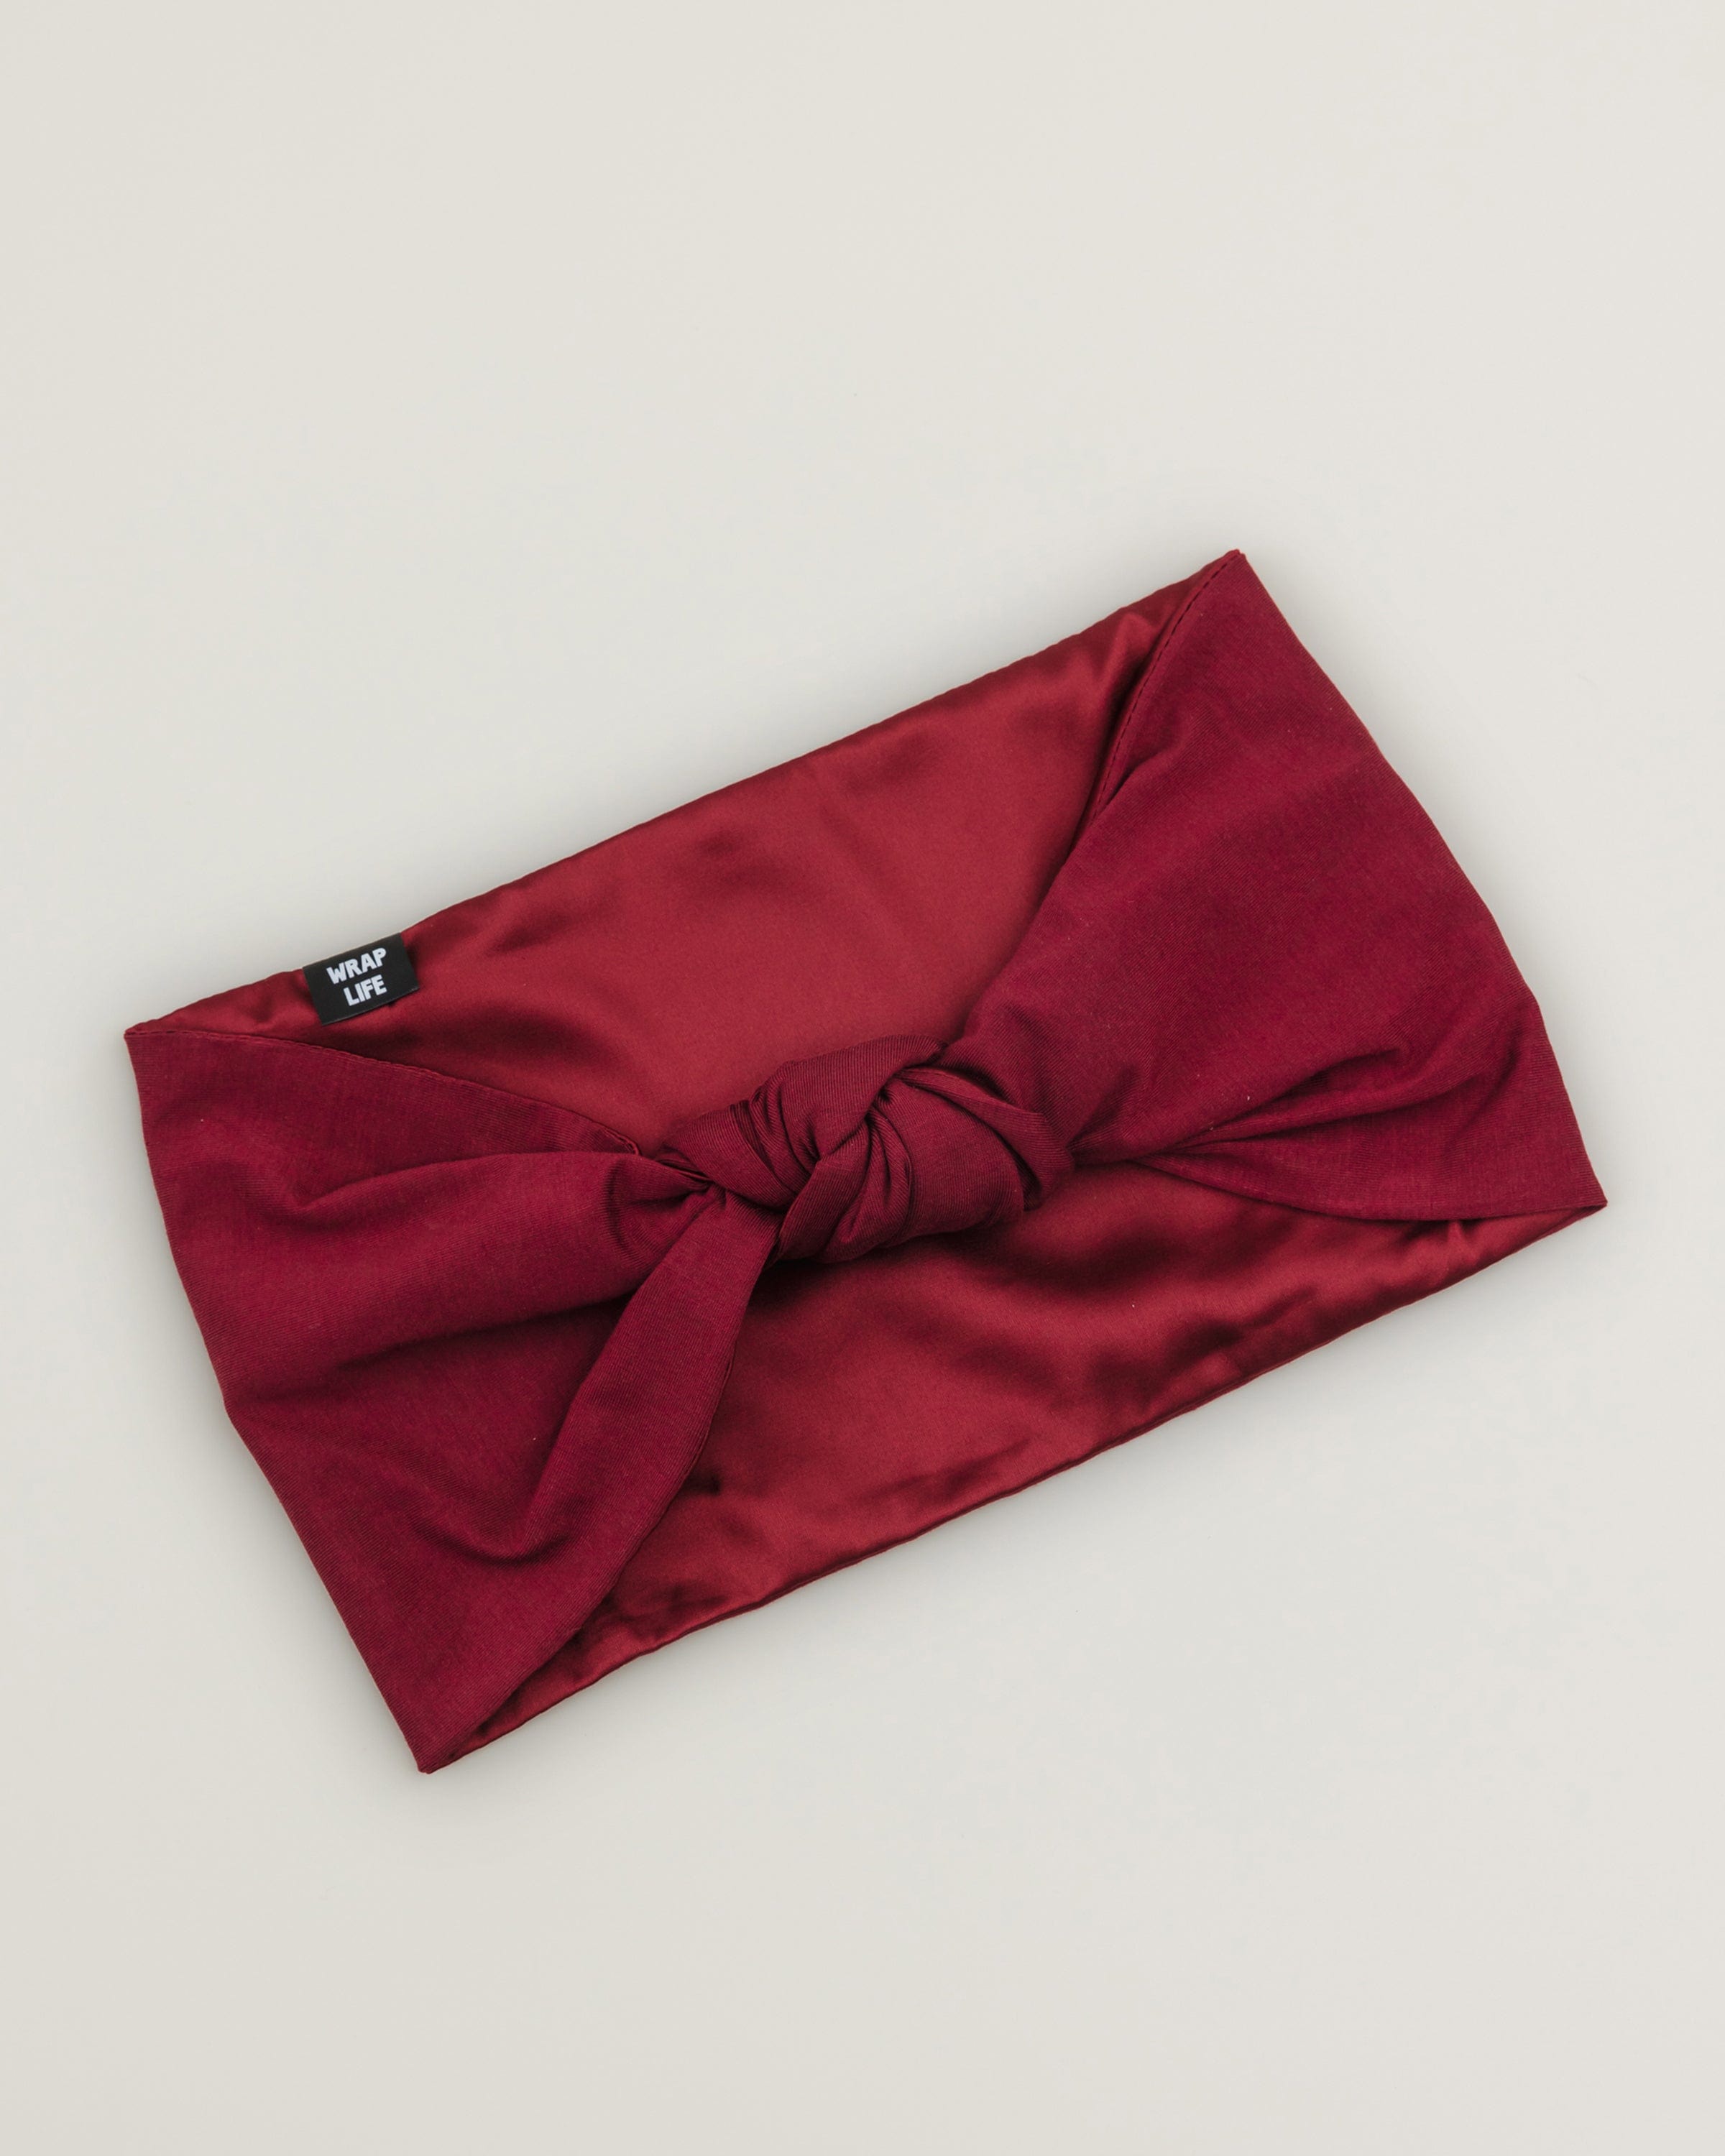 The Wrap Life Gentle Satin Lined Headband in Pinot Red Headband